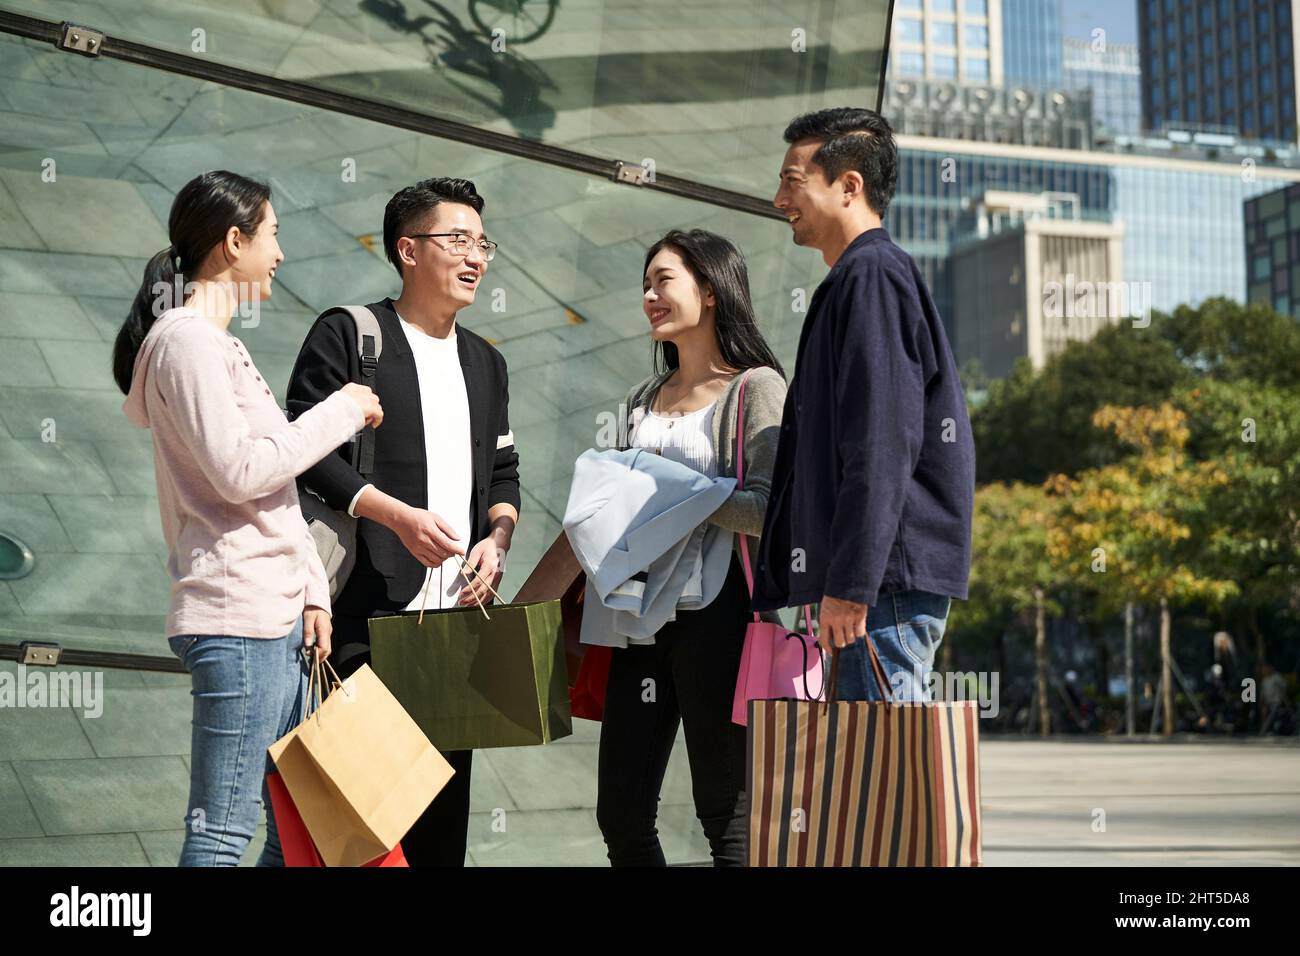 group of four young asian people standing on street talking chatting conversing during shopping trip happy and smiling Stock Photo